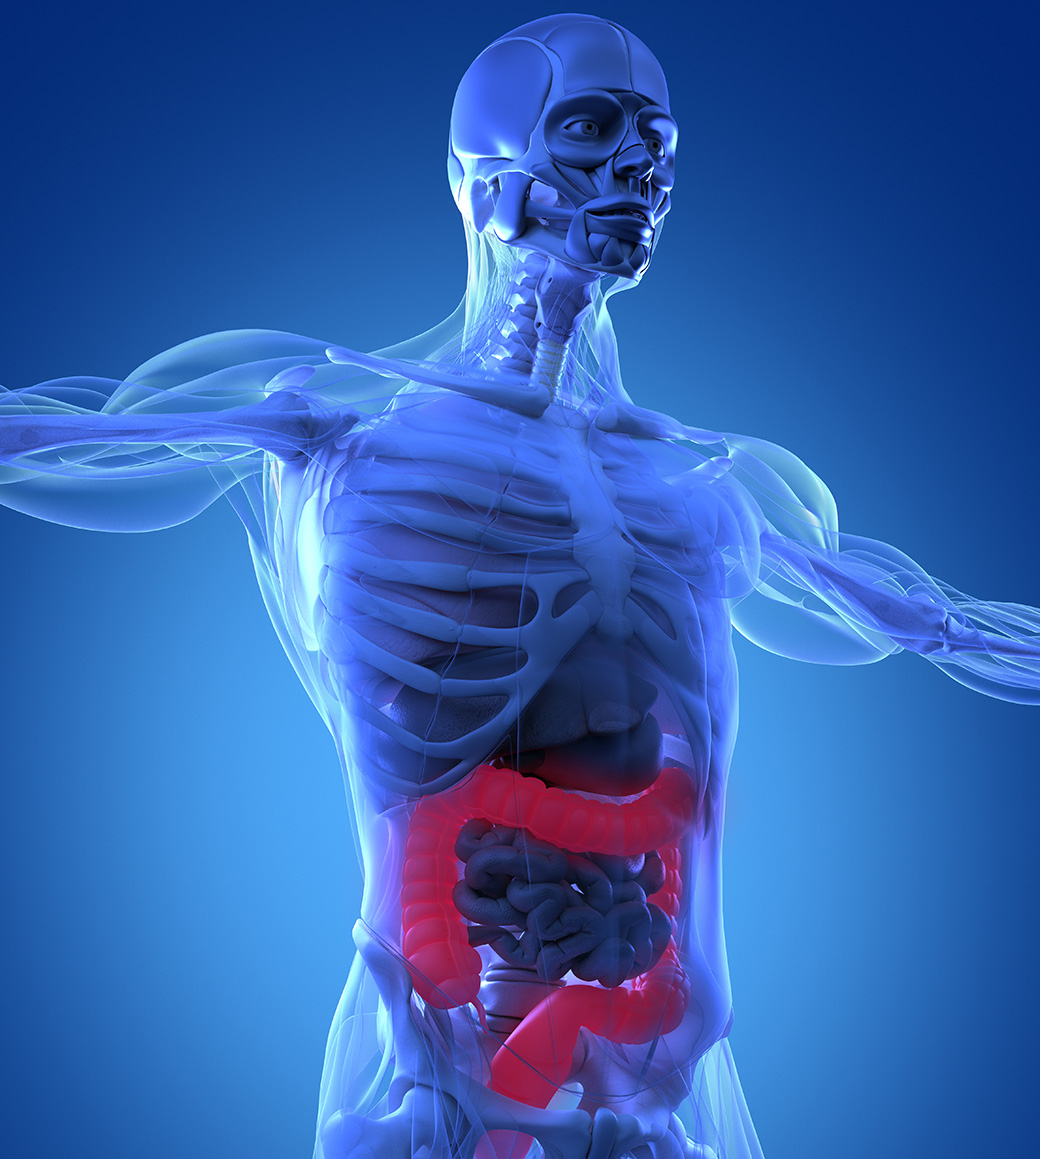 3D illustration of human anatomy, colon highlighted, xray-like view.